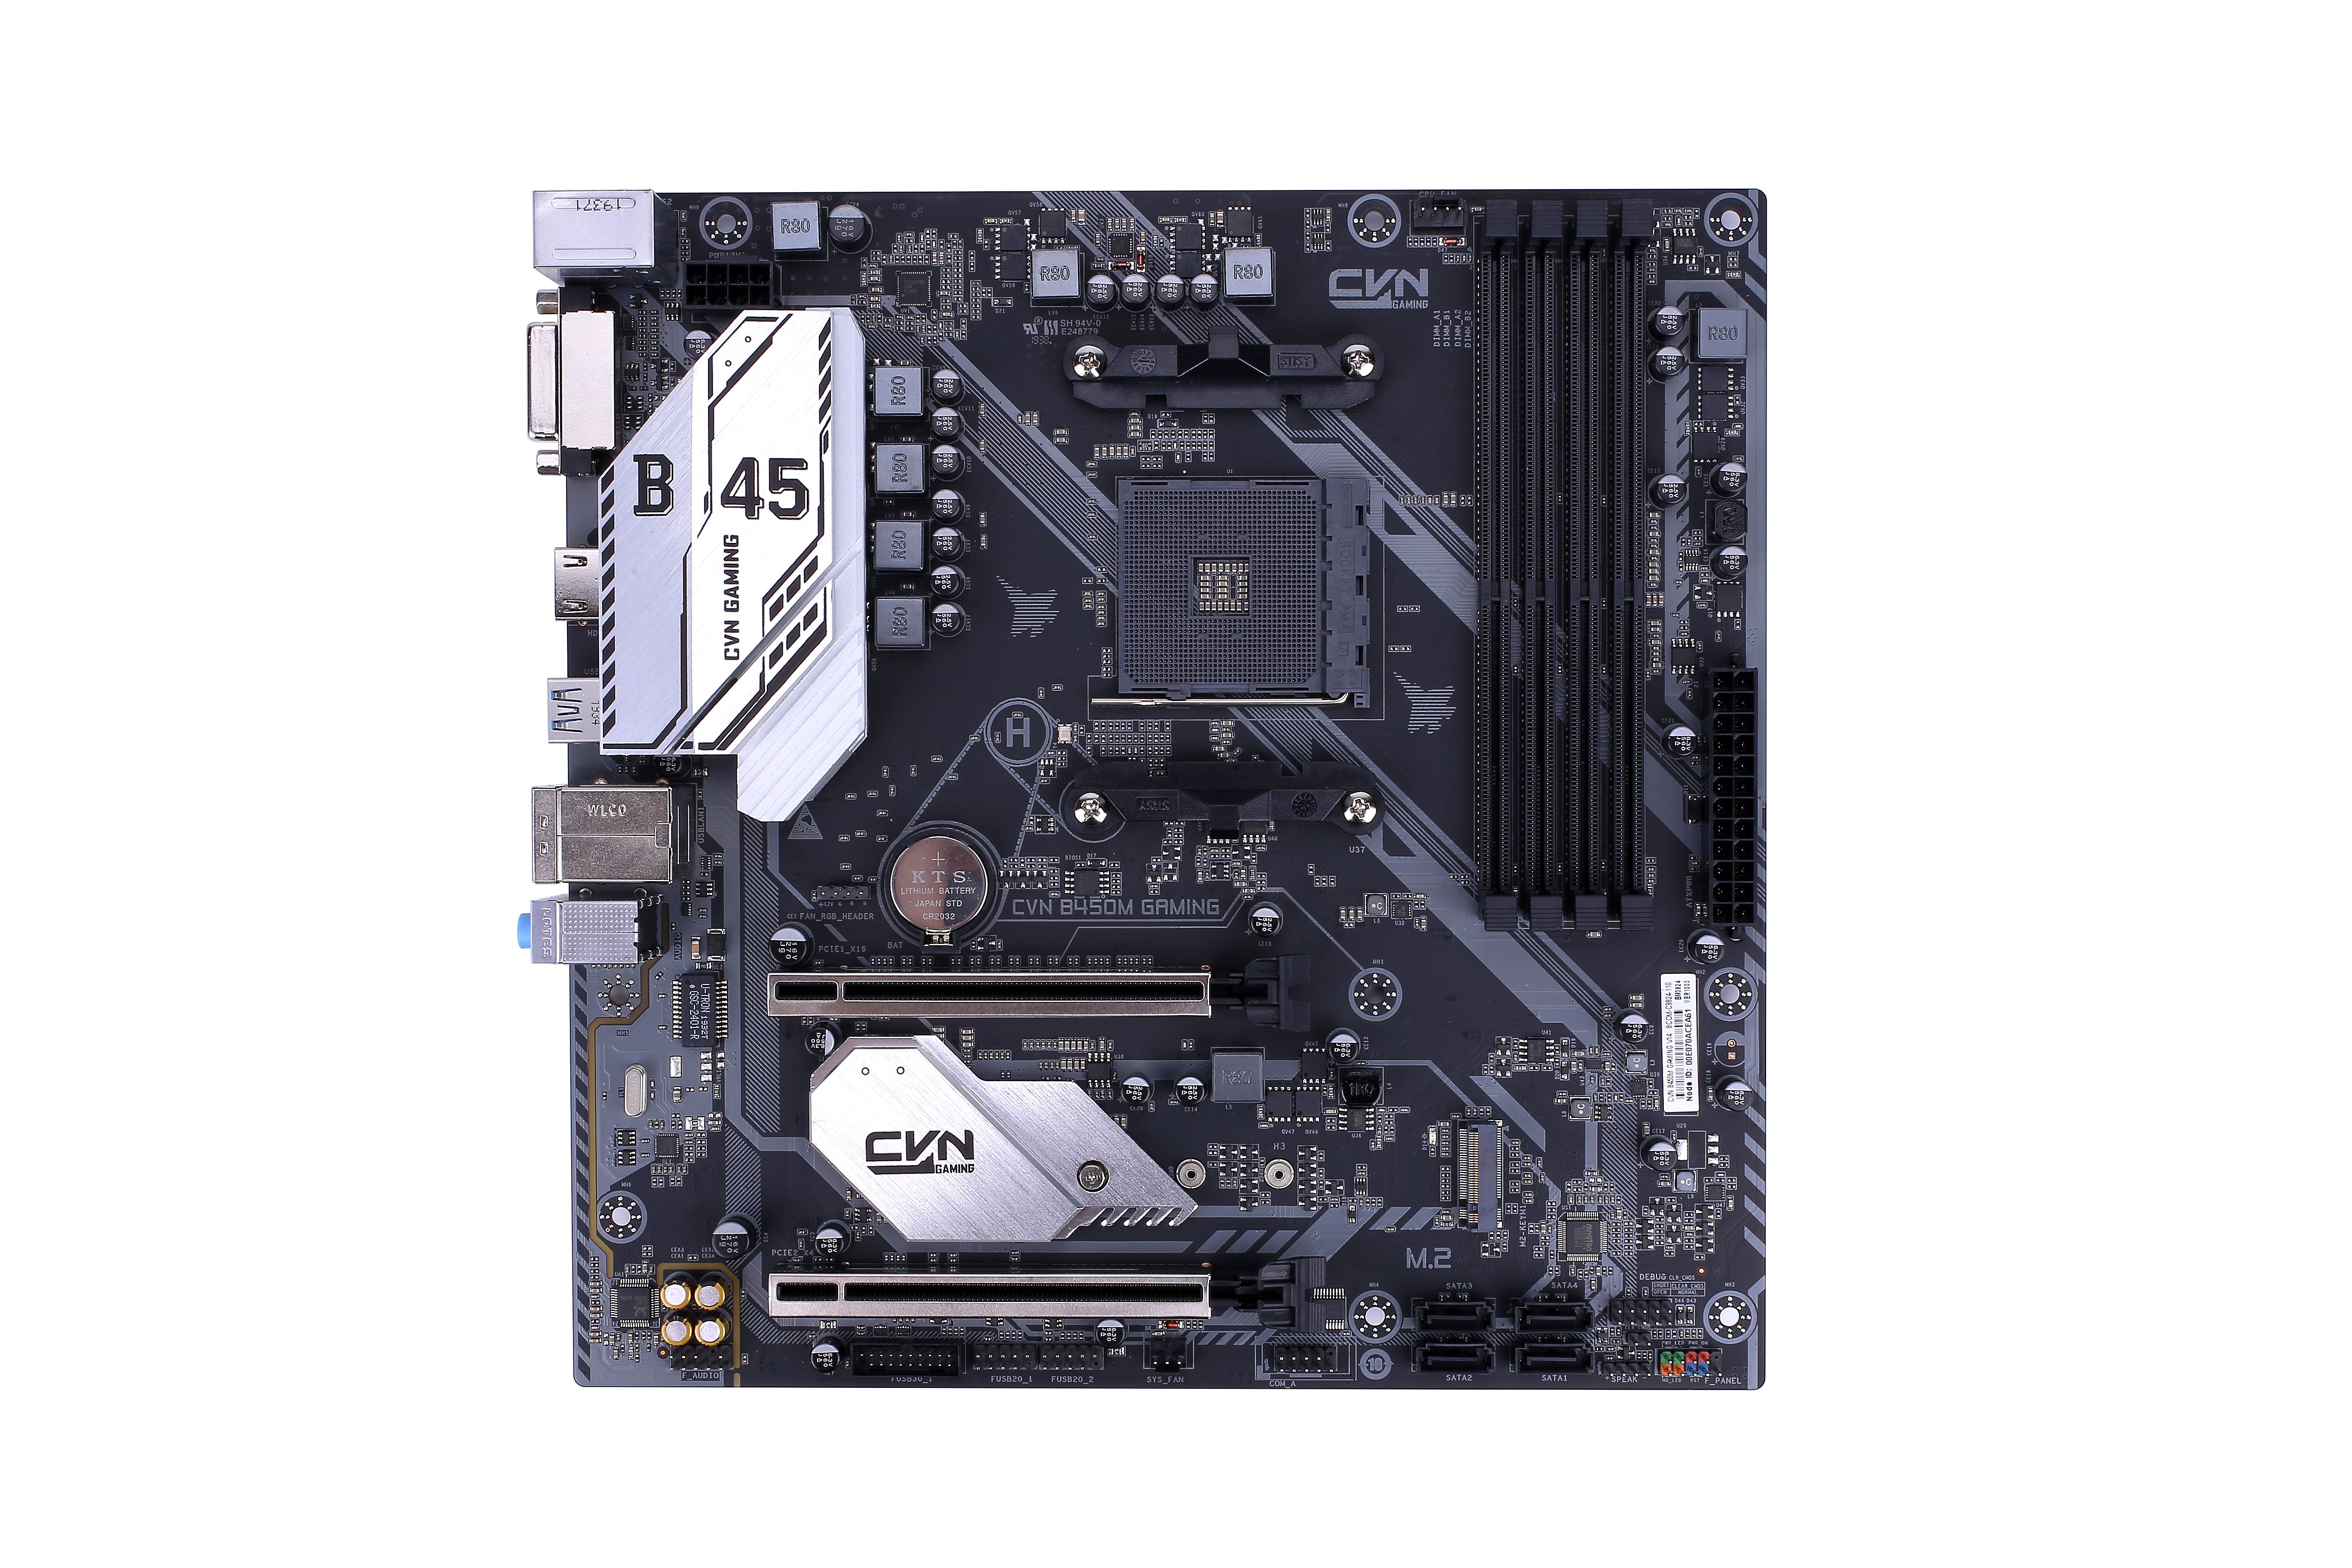 Colorful-CVN-B450M-GAMING-V14-Computer-Motherboard-Dual-Channel-DDR4-Memory-OC-Support-AMD-Socket-AM-1720803